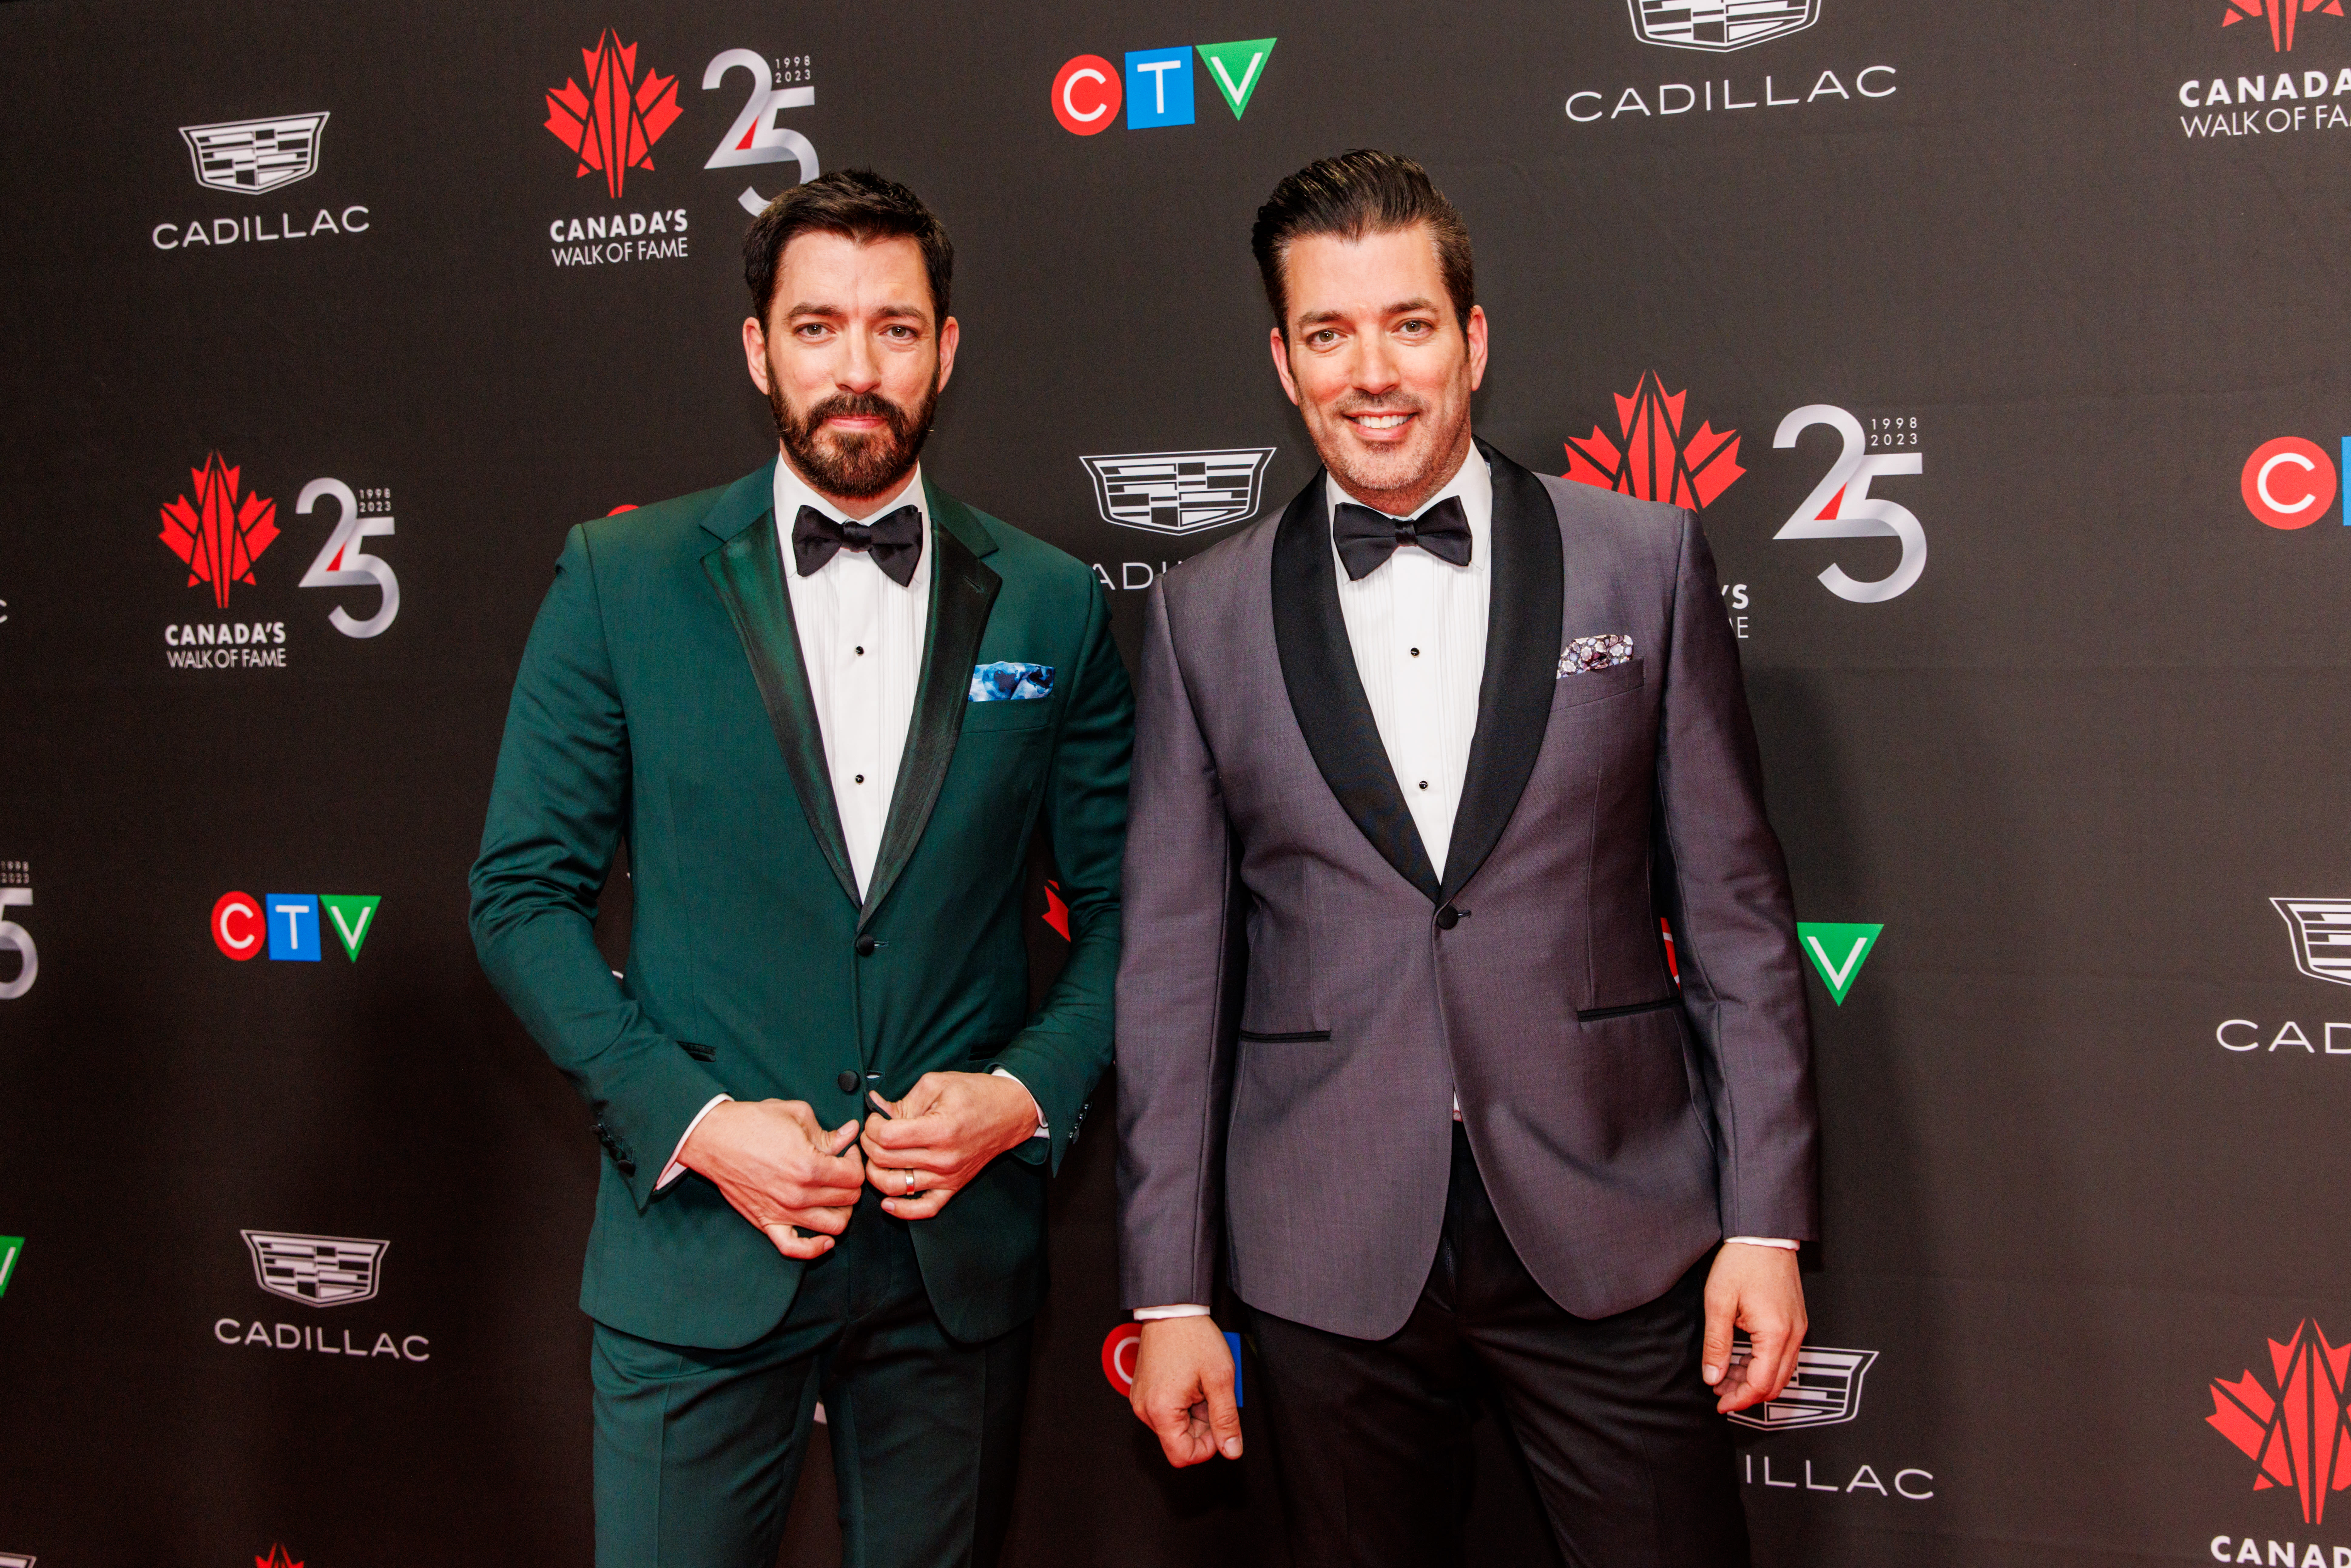 The ‘Property Brothers’ Have Built an Empire! See Drew and Jonathan Scott’s Massive Net Worth